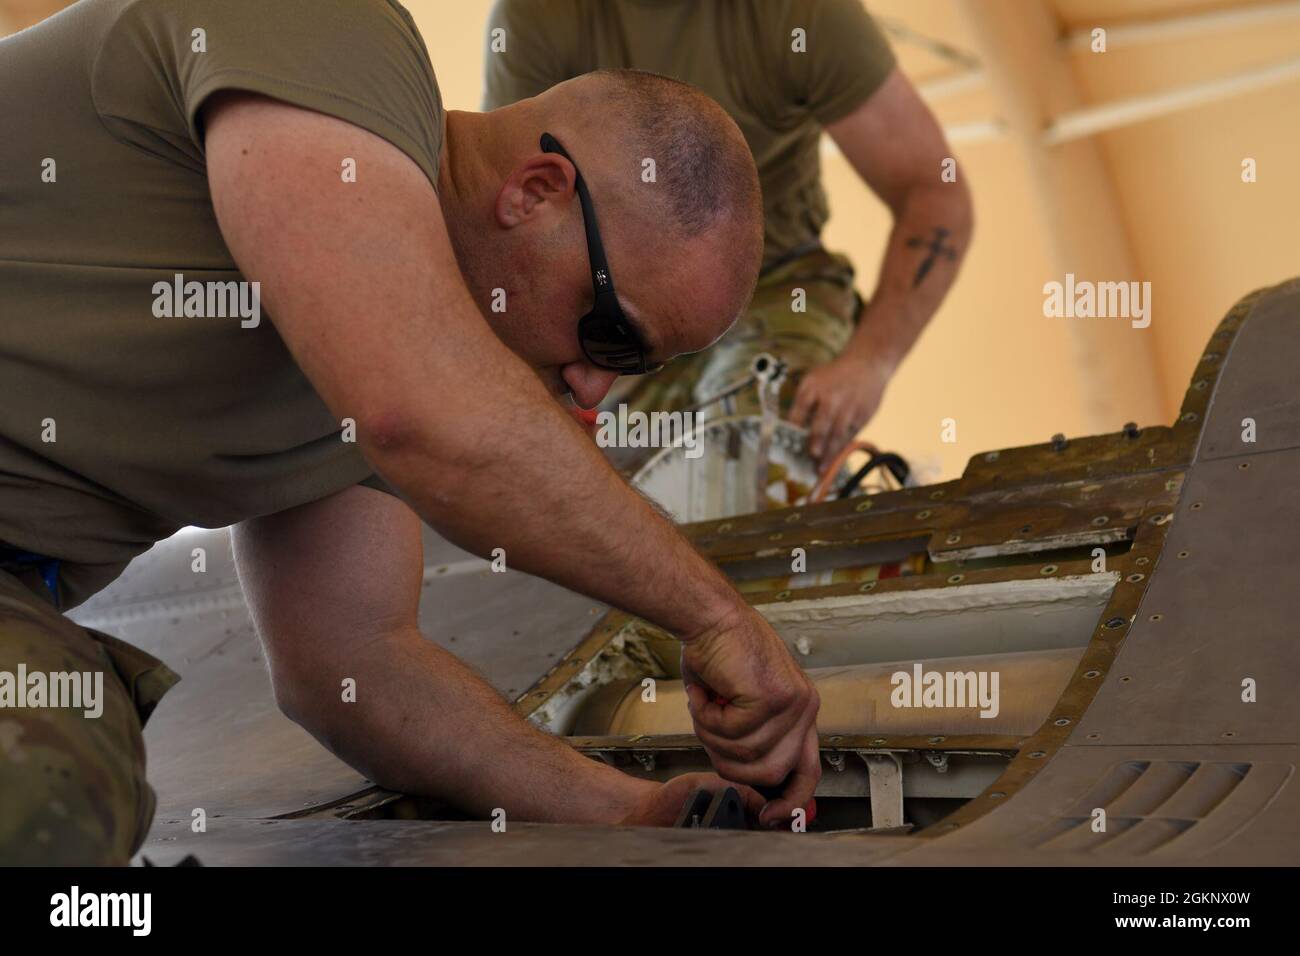 U.S. Air Force Master Sgt. James Laverdiere, 378th Expeditionary Maintenance Squadron armament backshop personnel, works to remove parts of an M61A1 Vulcan cannon from an F-16 Fighting Falcon fighter jet at Prince Sultan Air Base, Kingdom of Saudi Arabia, June 8, 2021. The 'Swamp Fox' Airmen from the South Carolina Air National Guard are deployed to PSAB to project combat power and help bolster defensive capabilities against potential threats in the region. Stock Photo